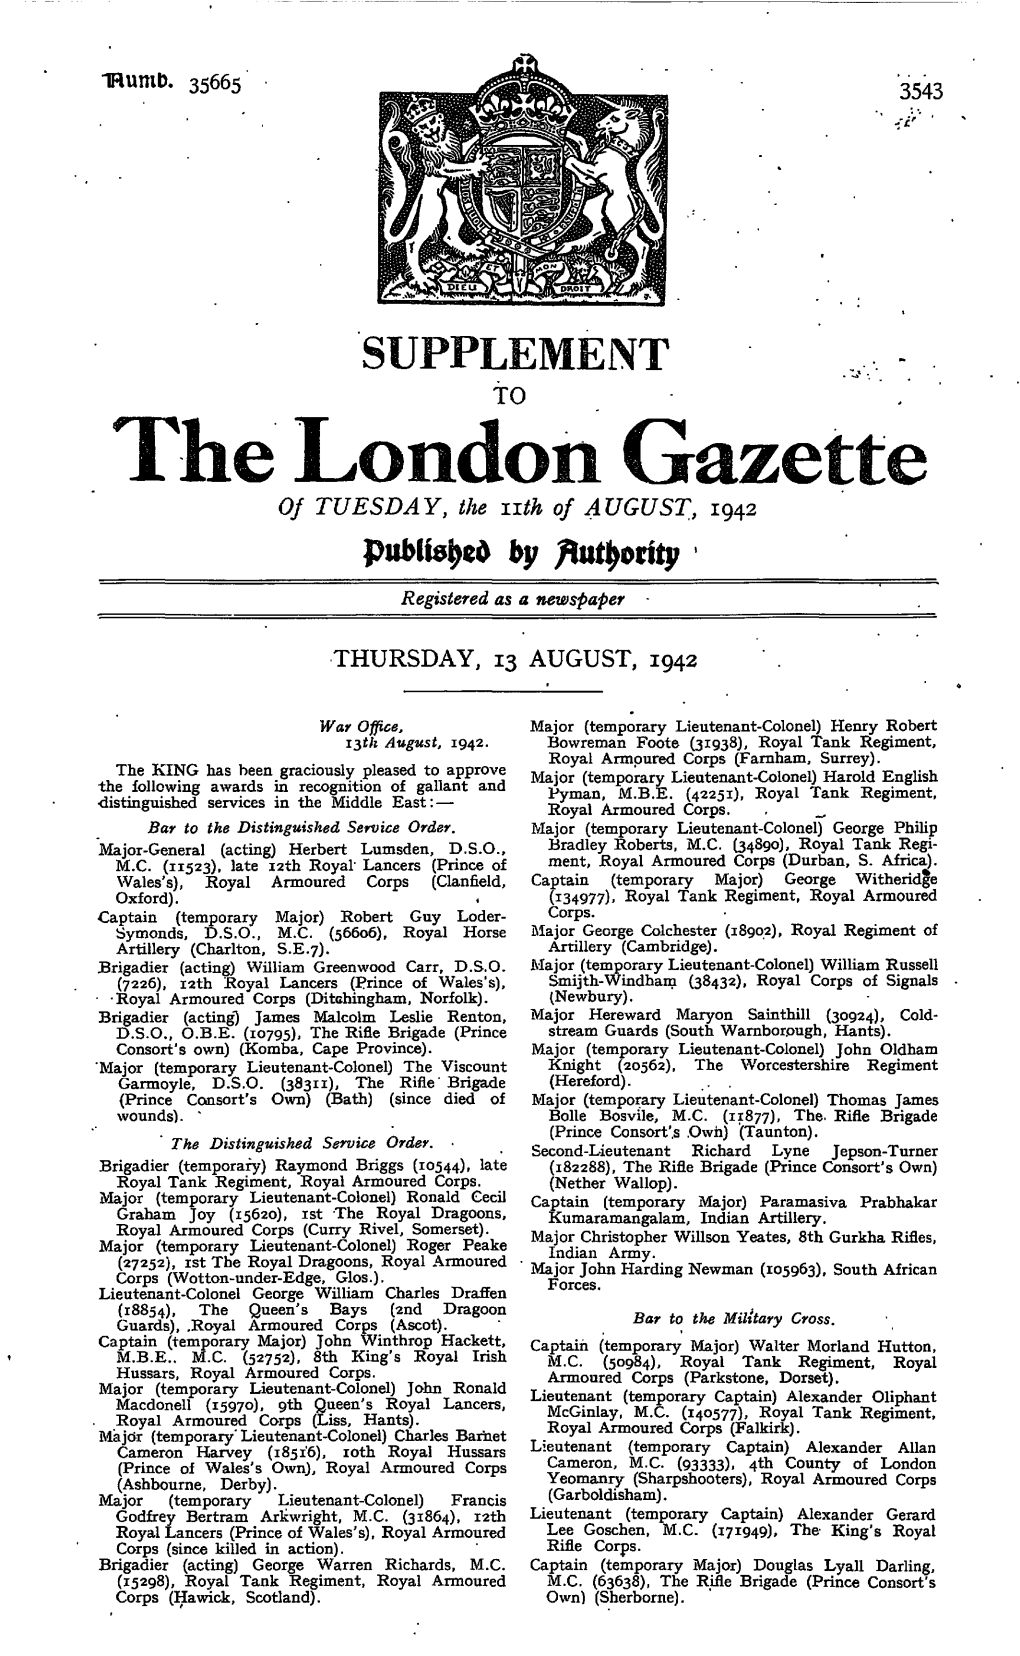 The London Gazette of TUESDAY, the Nth of AUGUST, 1942 by Registered As a Newspaper